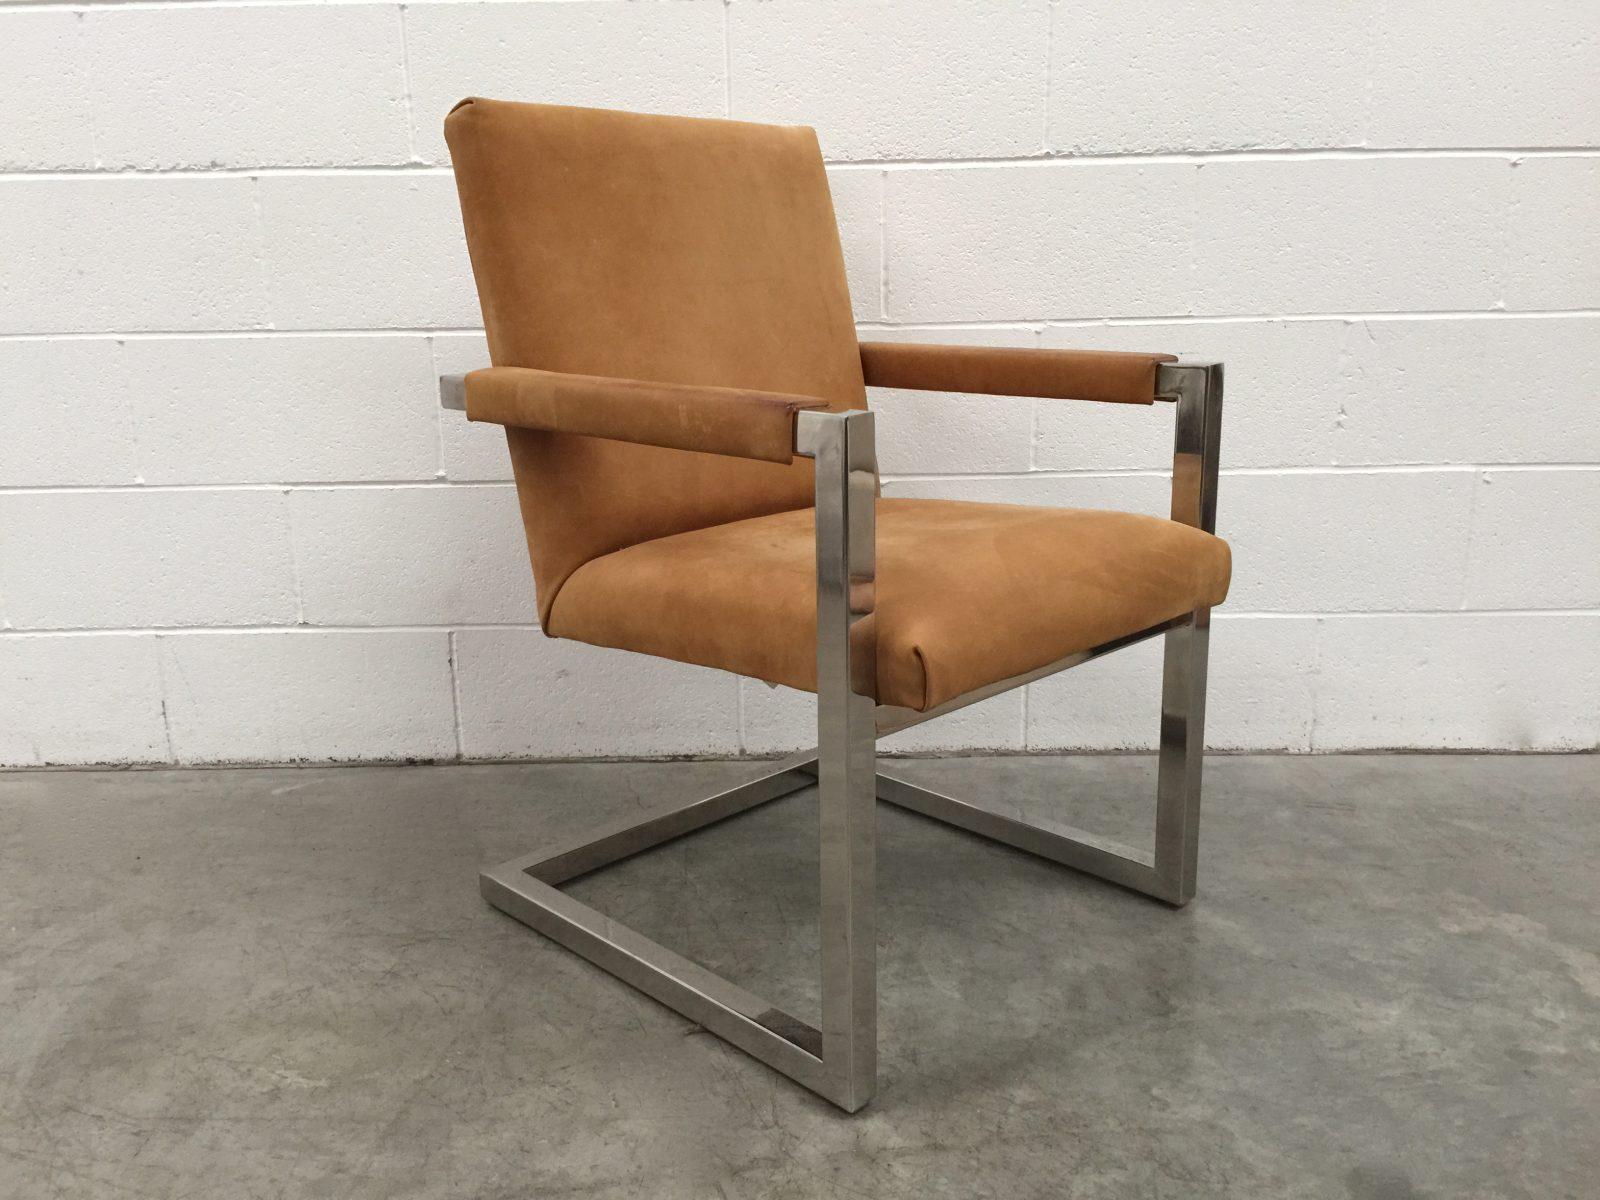 On offer on this occasion is a handsome, rare Ralph Lauren “Polo” Chrome-Framed Square Armchair, dressed in a peerless top-grade Tan Suede.

As you will no doubt be aware by your interest in this handsome pair, Ralph Lauren pieces are the epitome